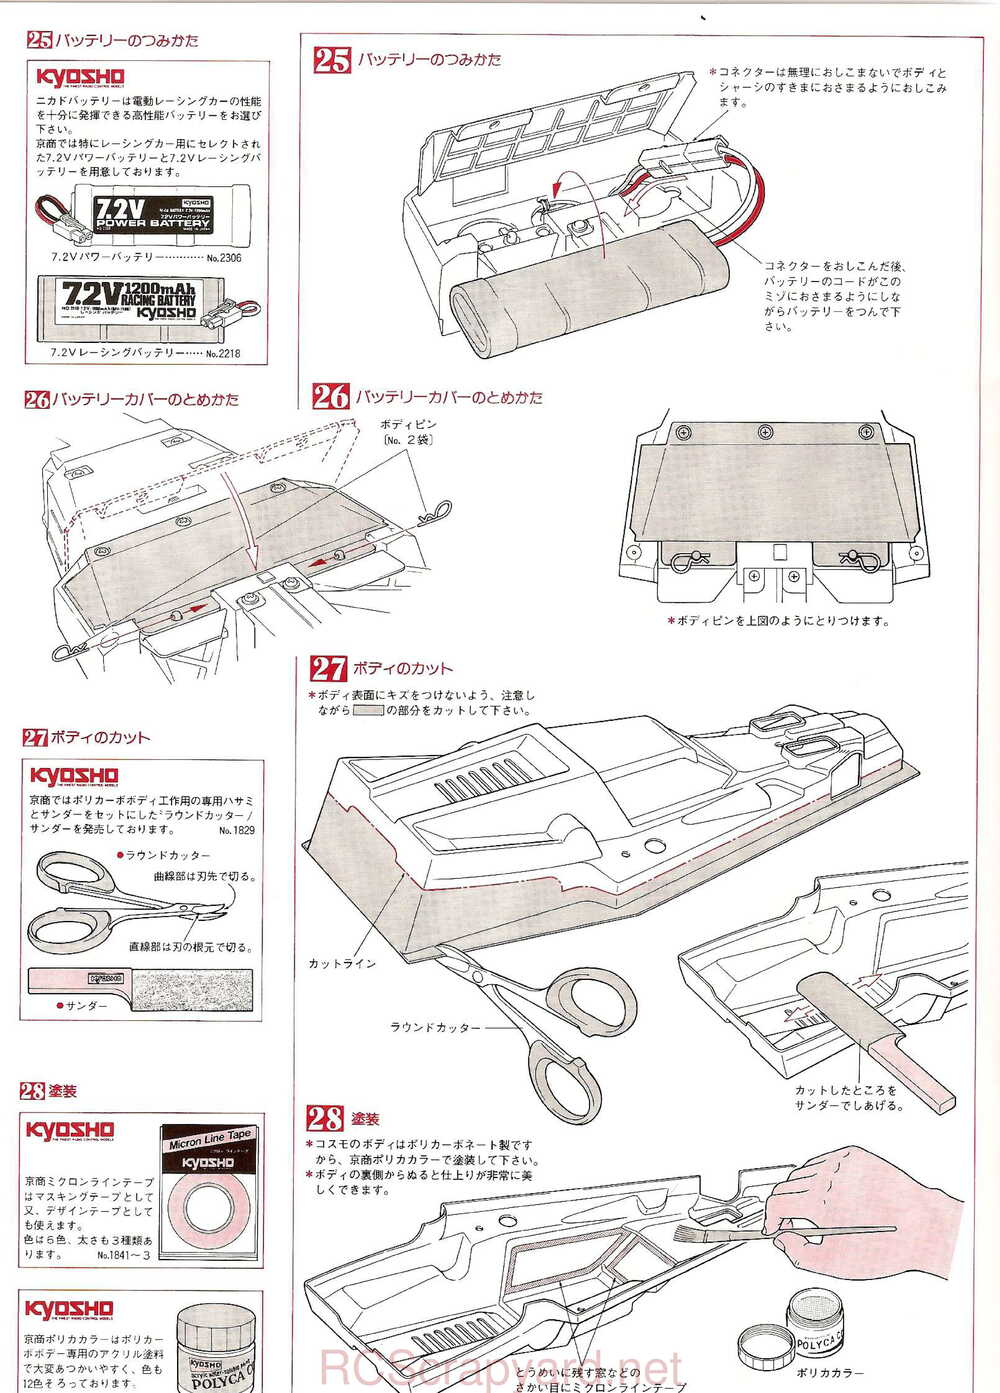 Kyosho - 3084 - Cosmo - Manual - Page 12